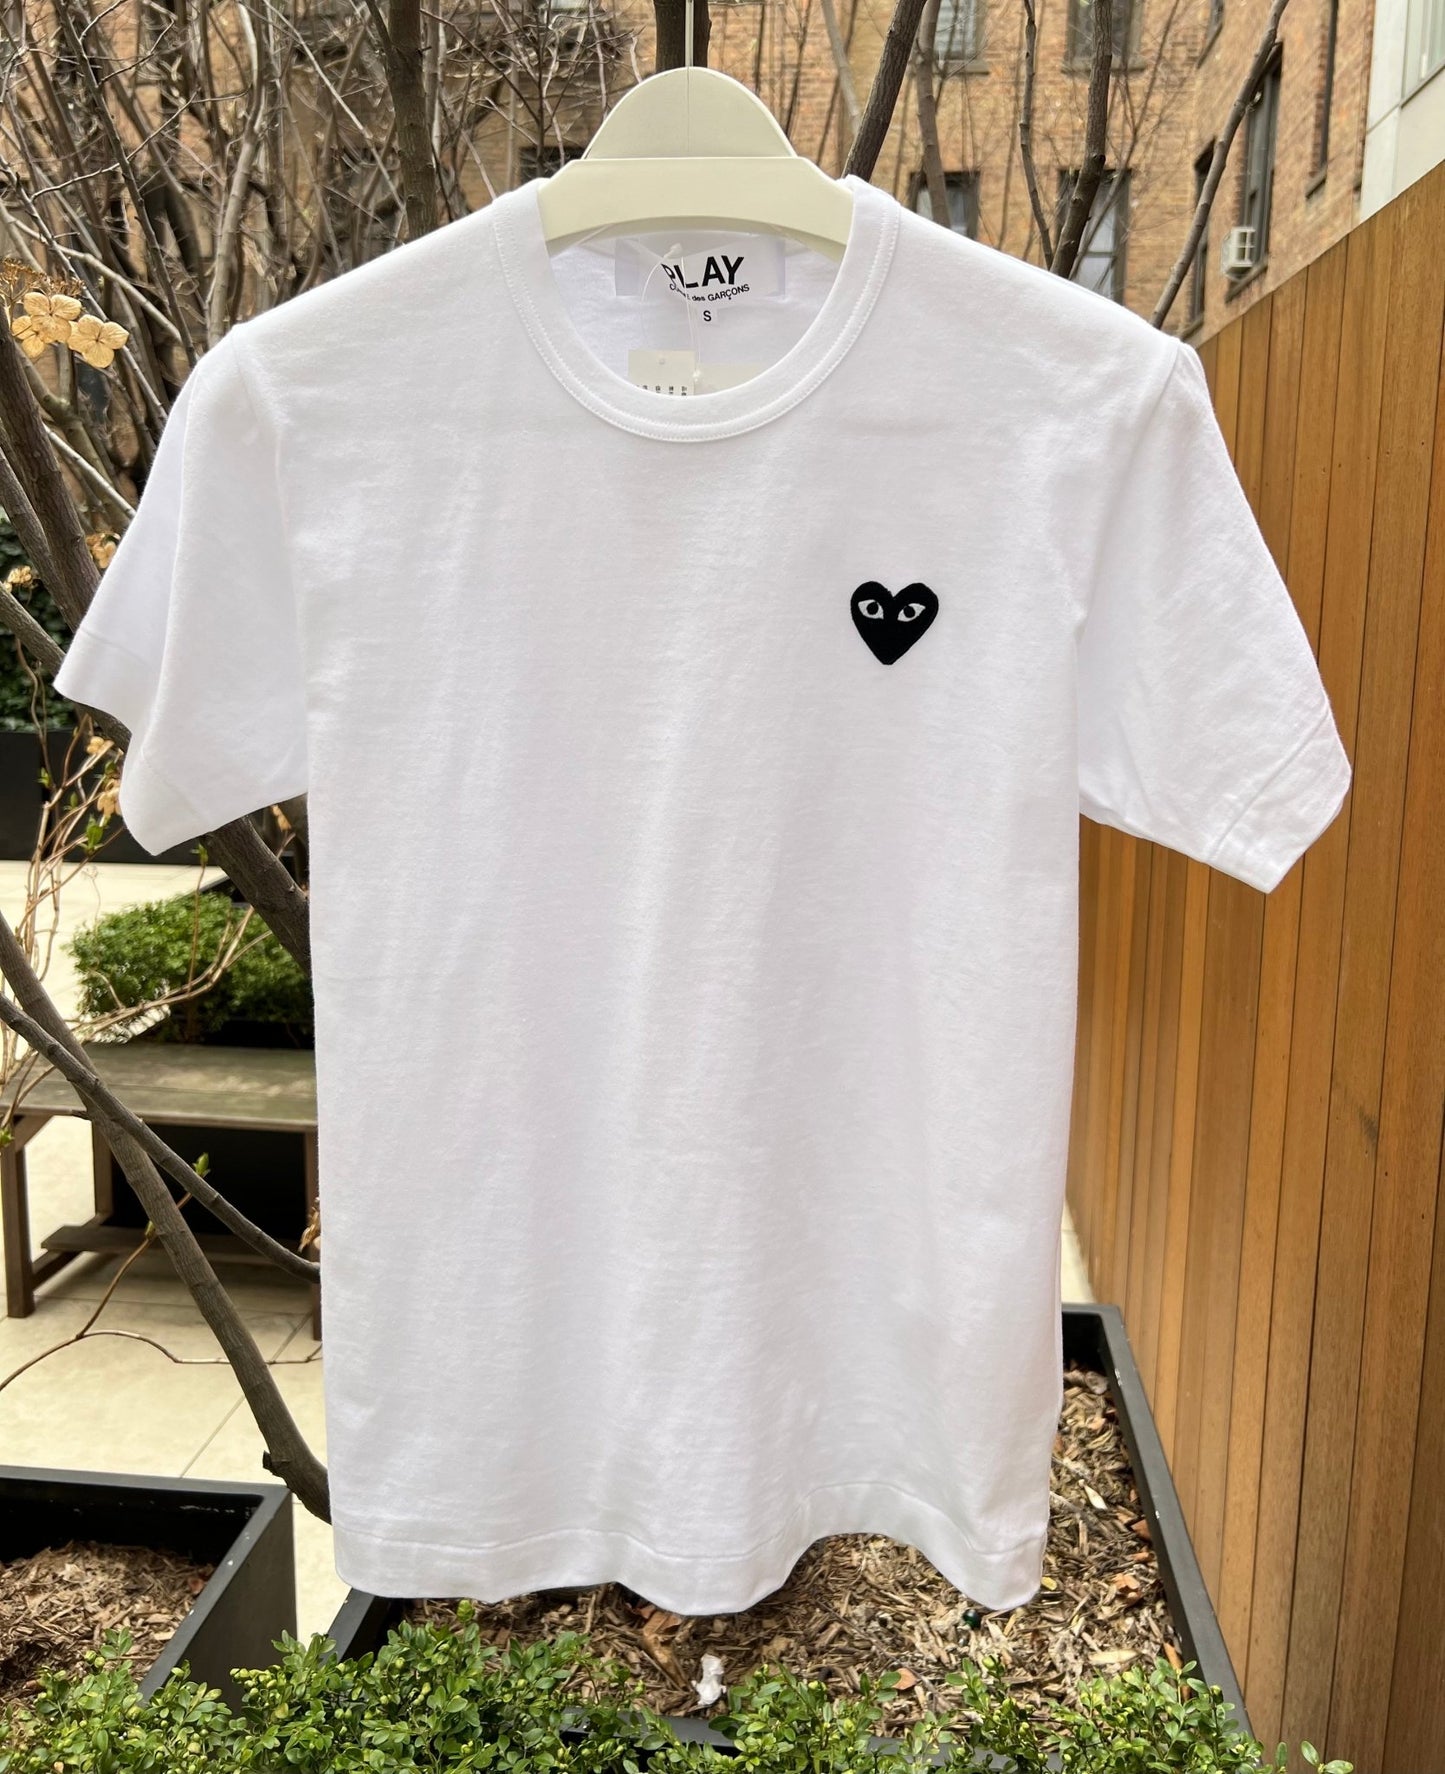 Black COMME DES GARCONS P1T064 Play T-shirt with white heart displayed on a hanger outdoors.